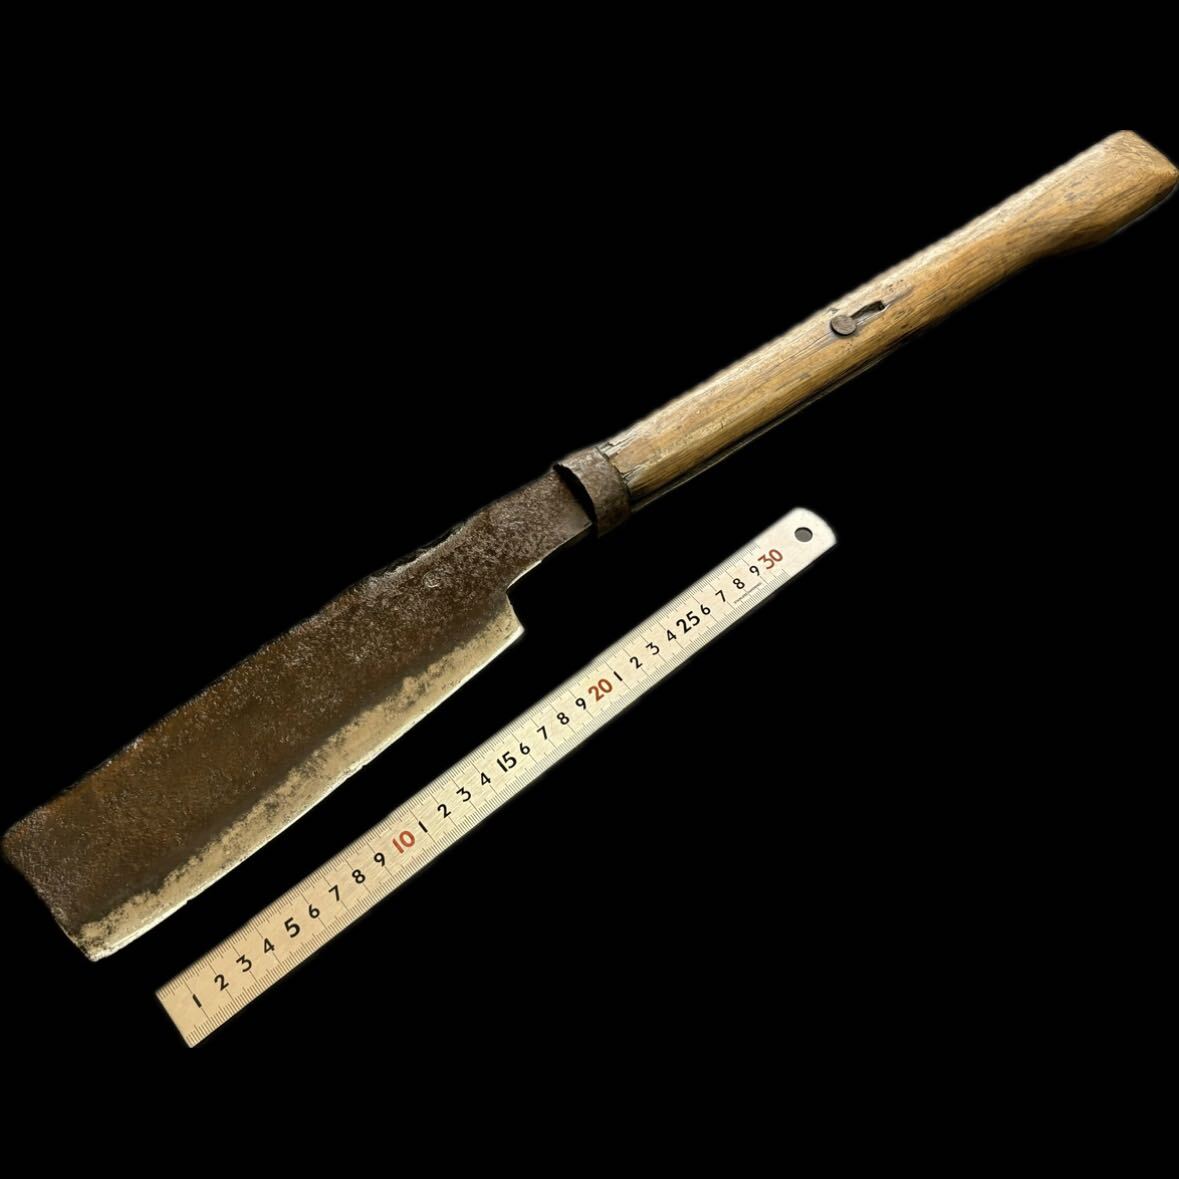 [.] mountain . era tool large branch strike . hatchet thickness blade hand strike ( wood-chopping material tree . mountain work . industry ... Solo camp outdoor )